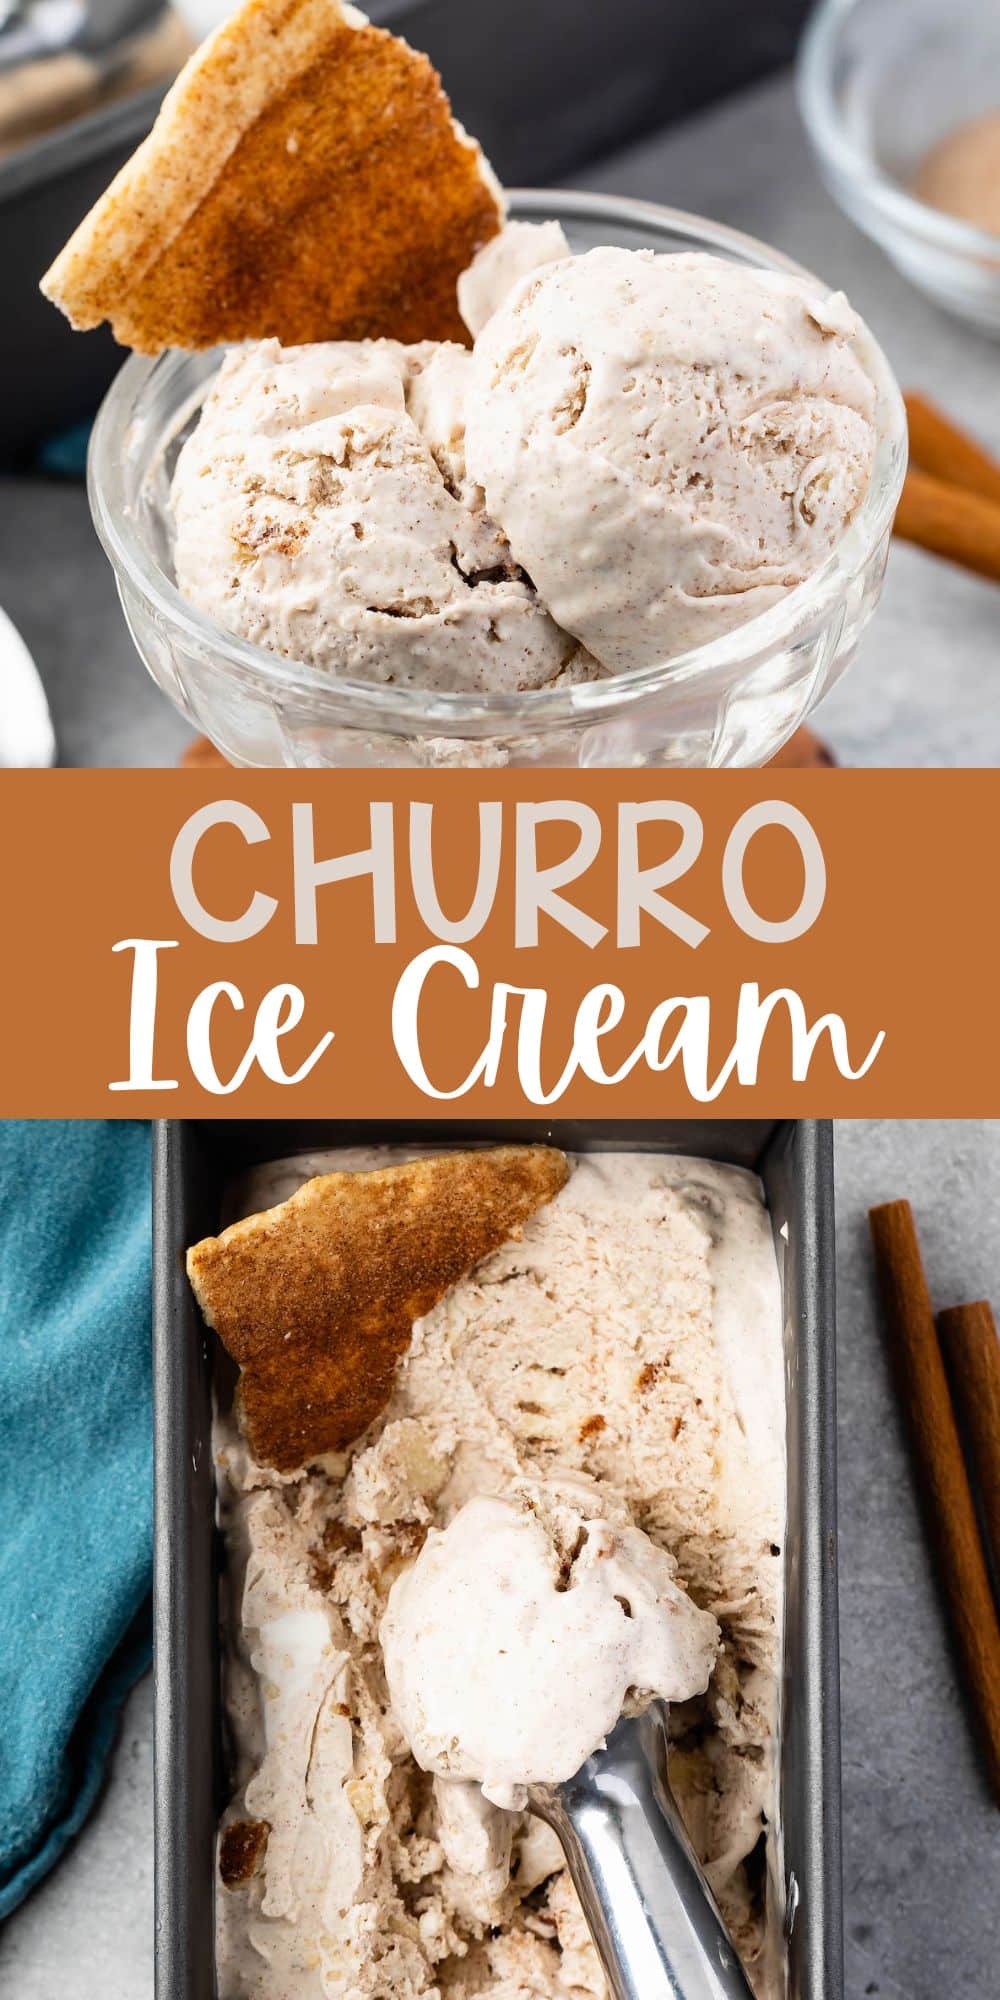 two photos of ice cream scooped into clear ice cream bowl and a churro piece mixed in with words on the image.